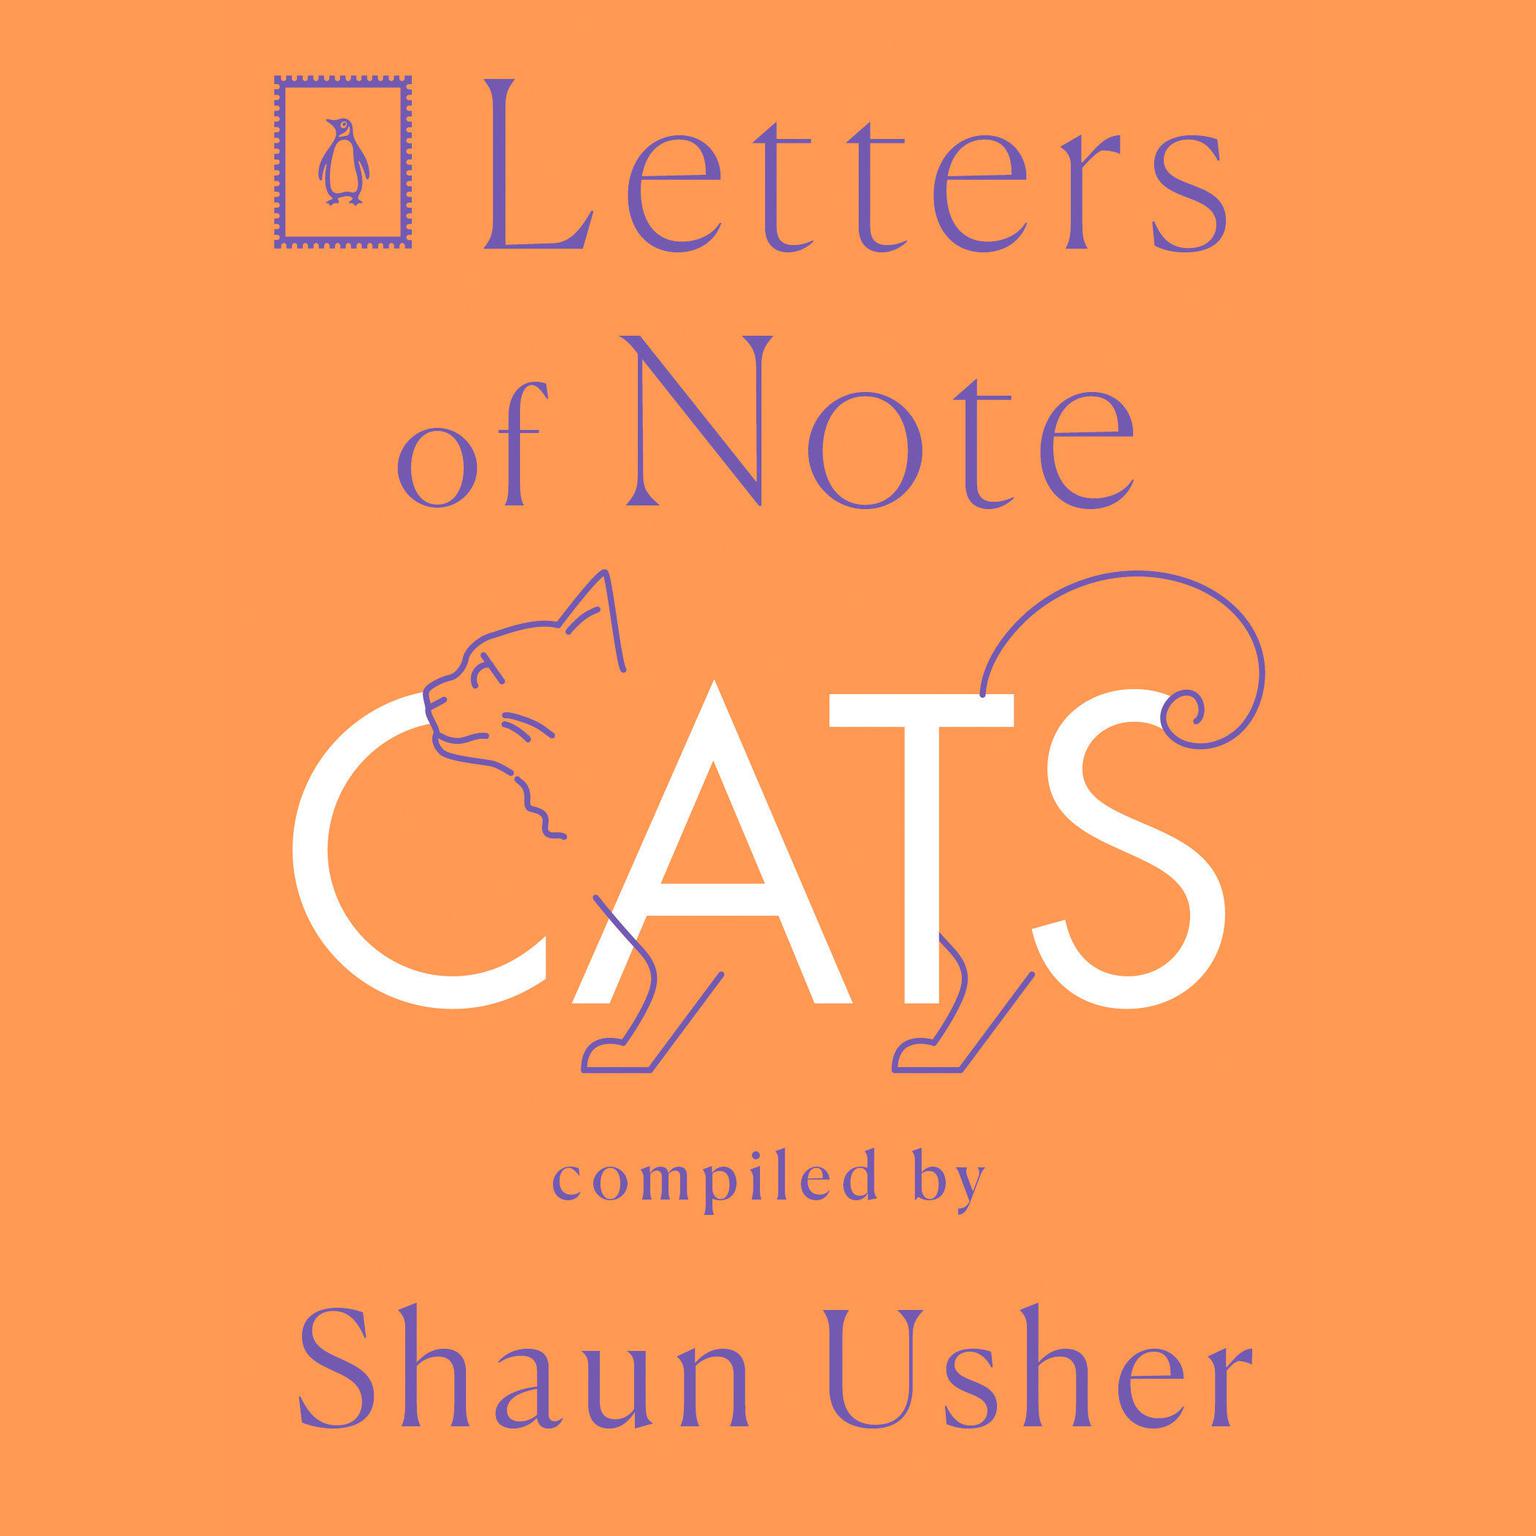 Letters of Note: Cats Audiobook, by Shaun Usher